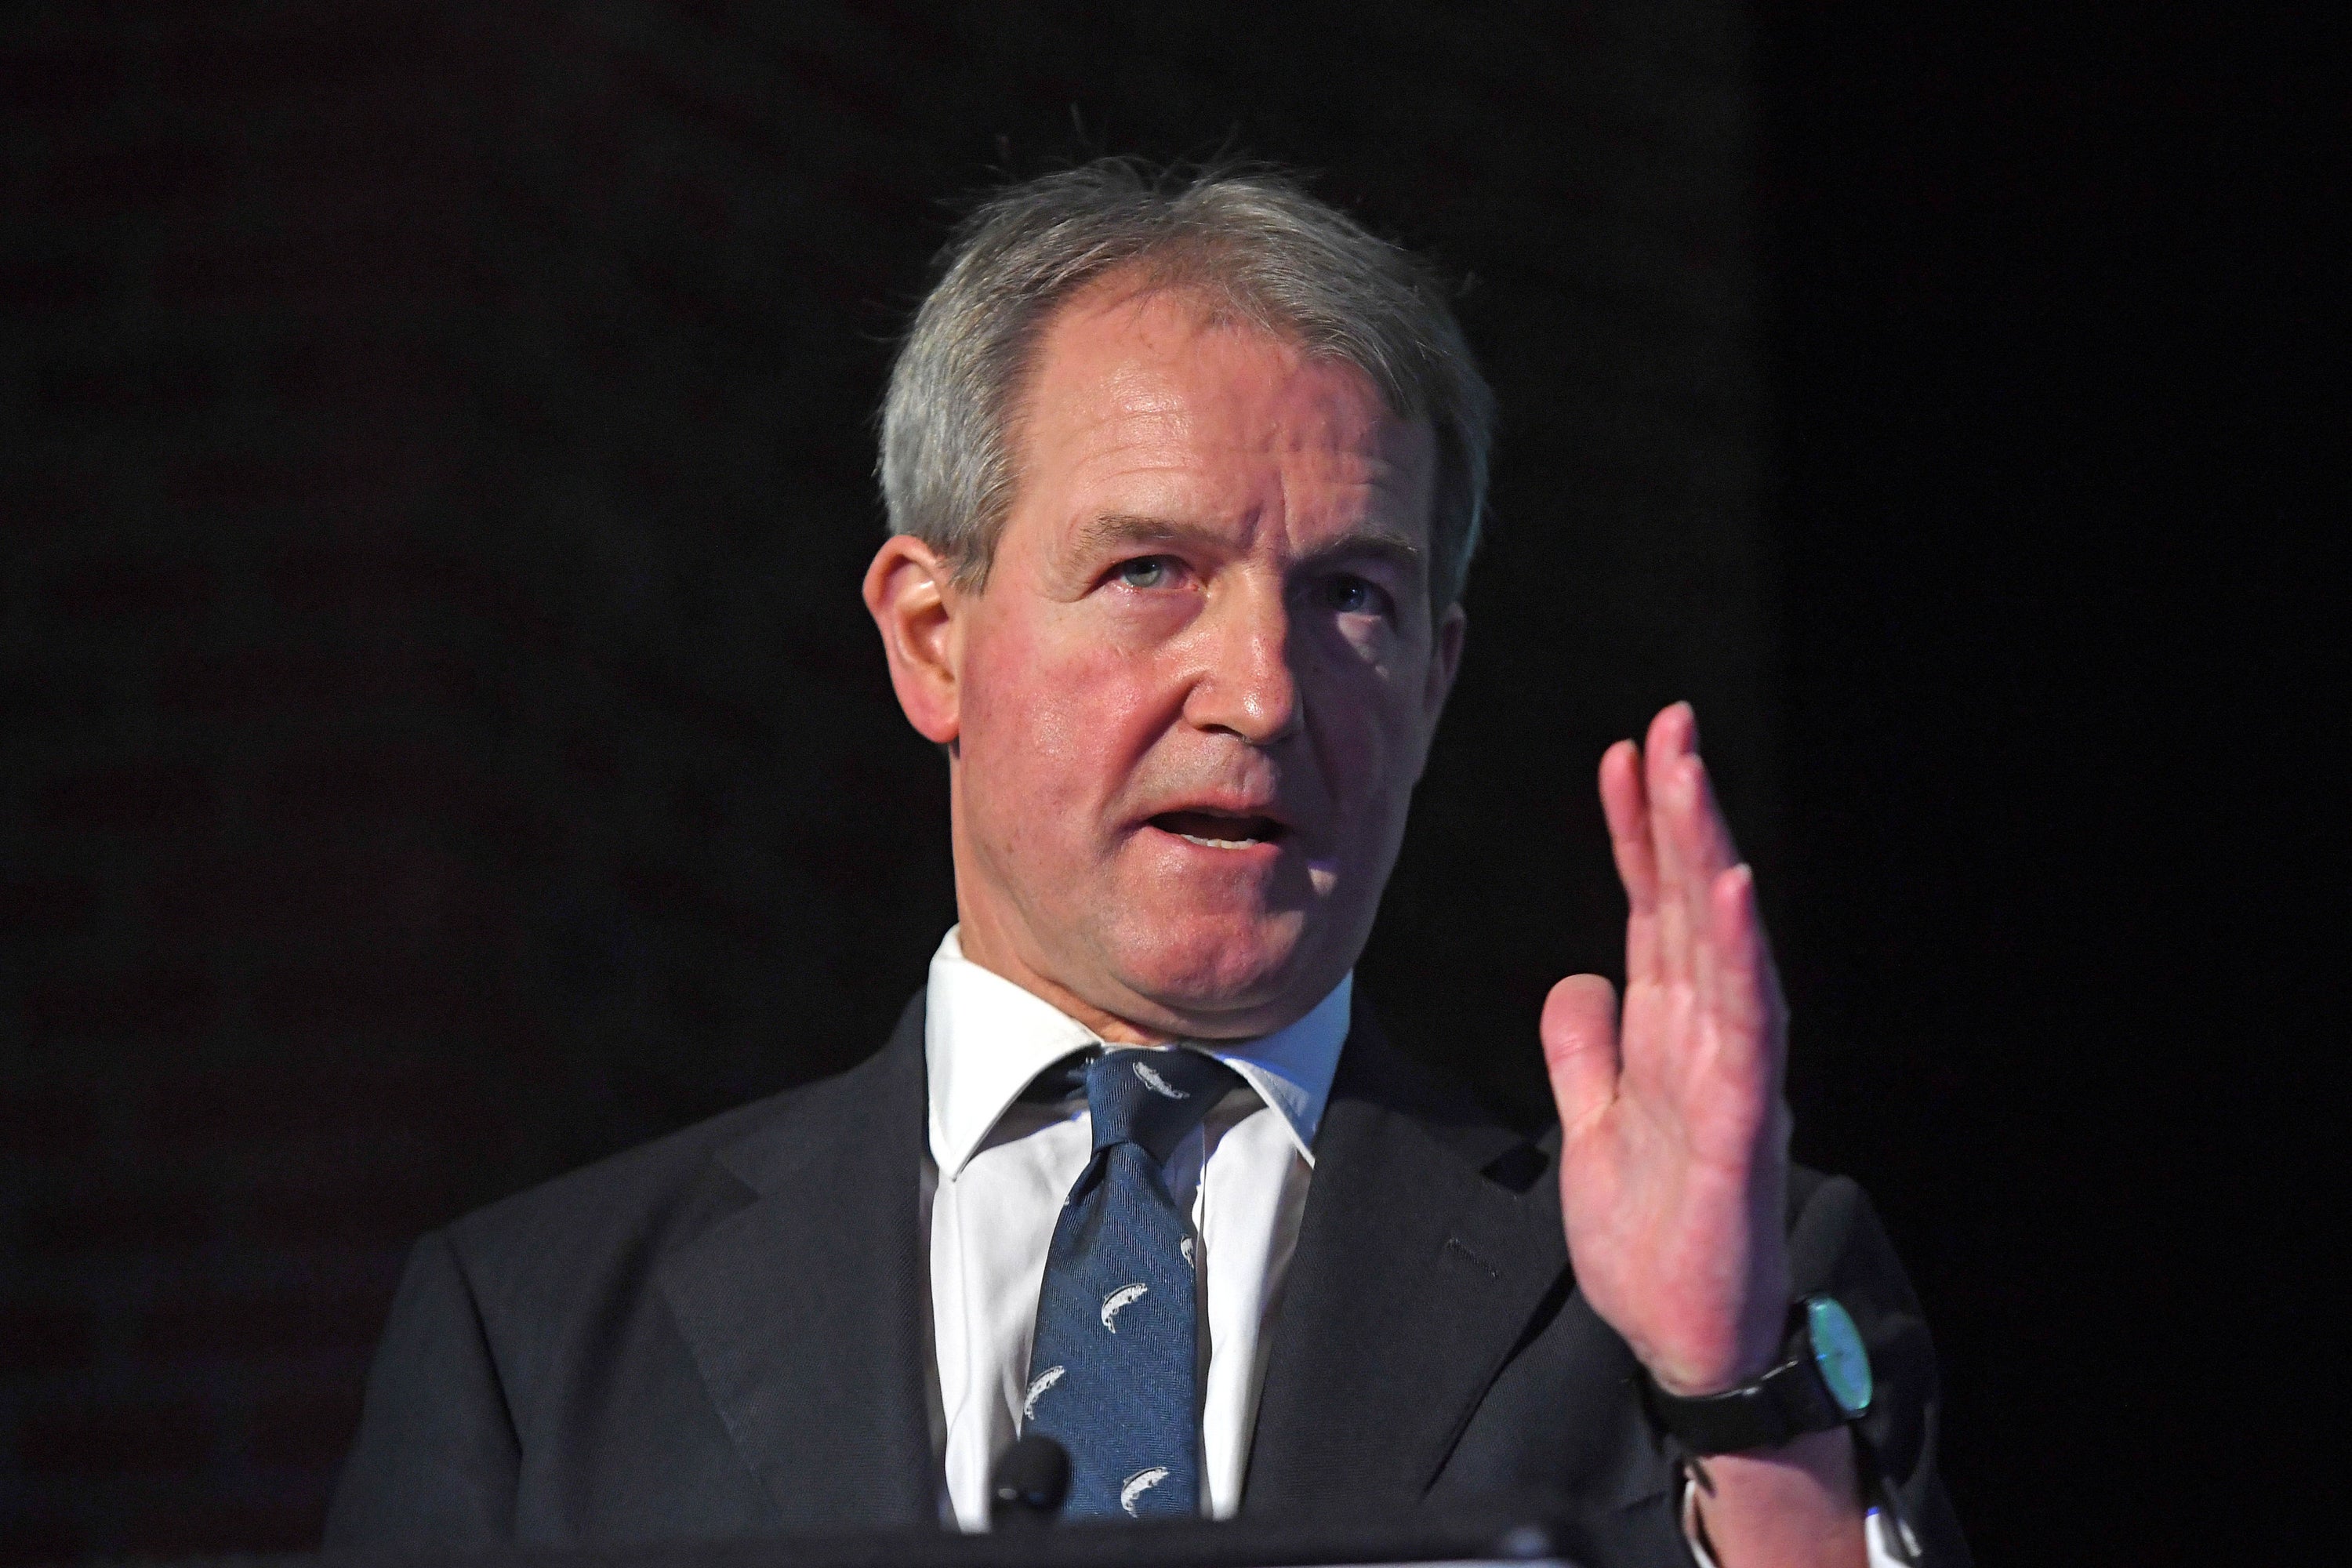 Owen Paterson, who resigned as the MP for North Shropshire – the slide in Boris Johnson’s poll ratings began with the scandal over Mr Paterson’s lobbying efforts (Victoria Jones/PA)